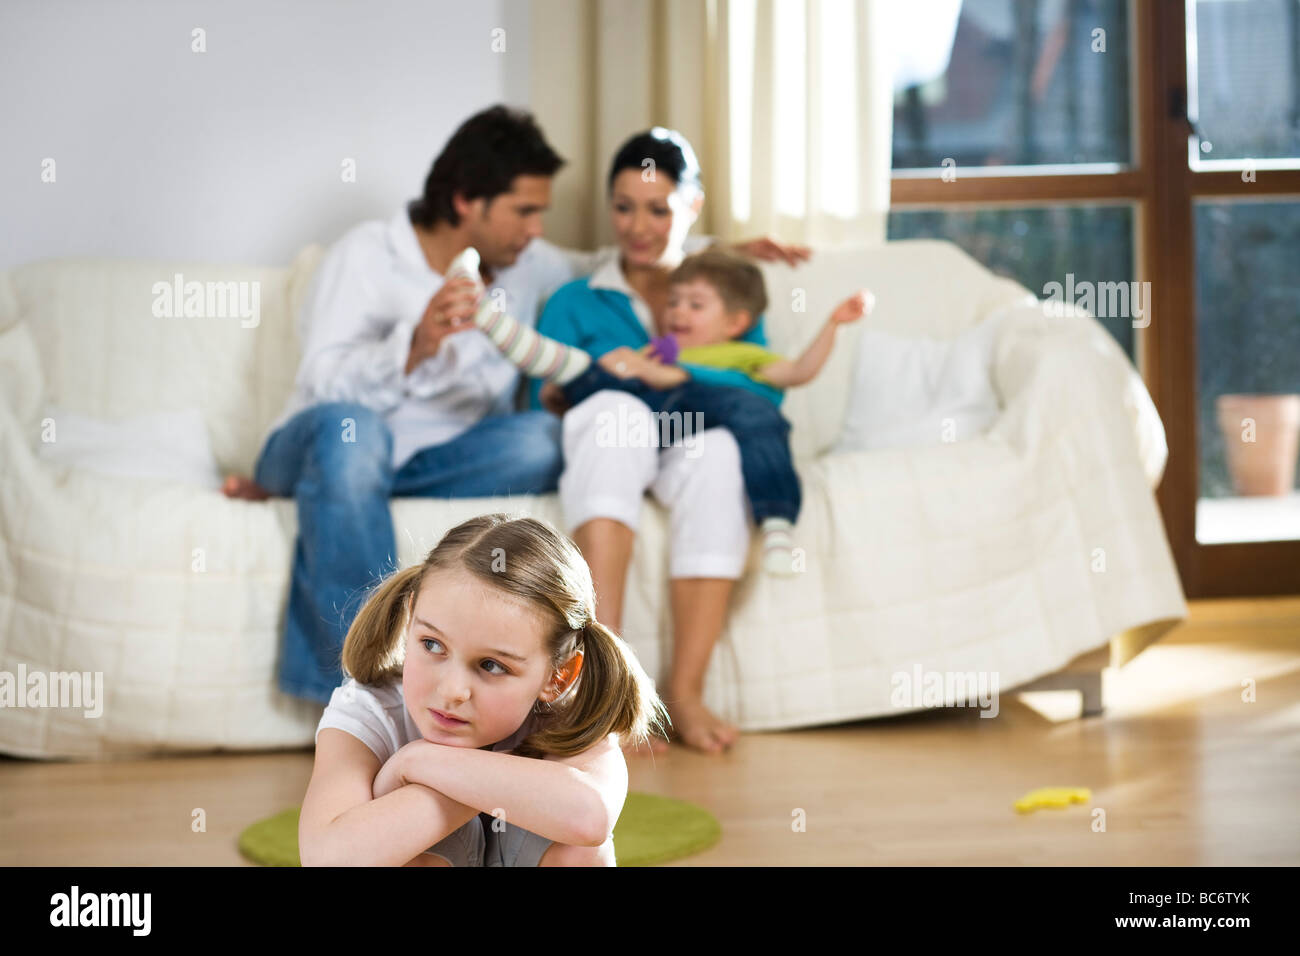 Girl jealous of younger brother Stock Photo 24737543 Alamy